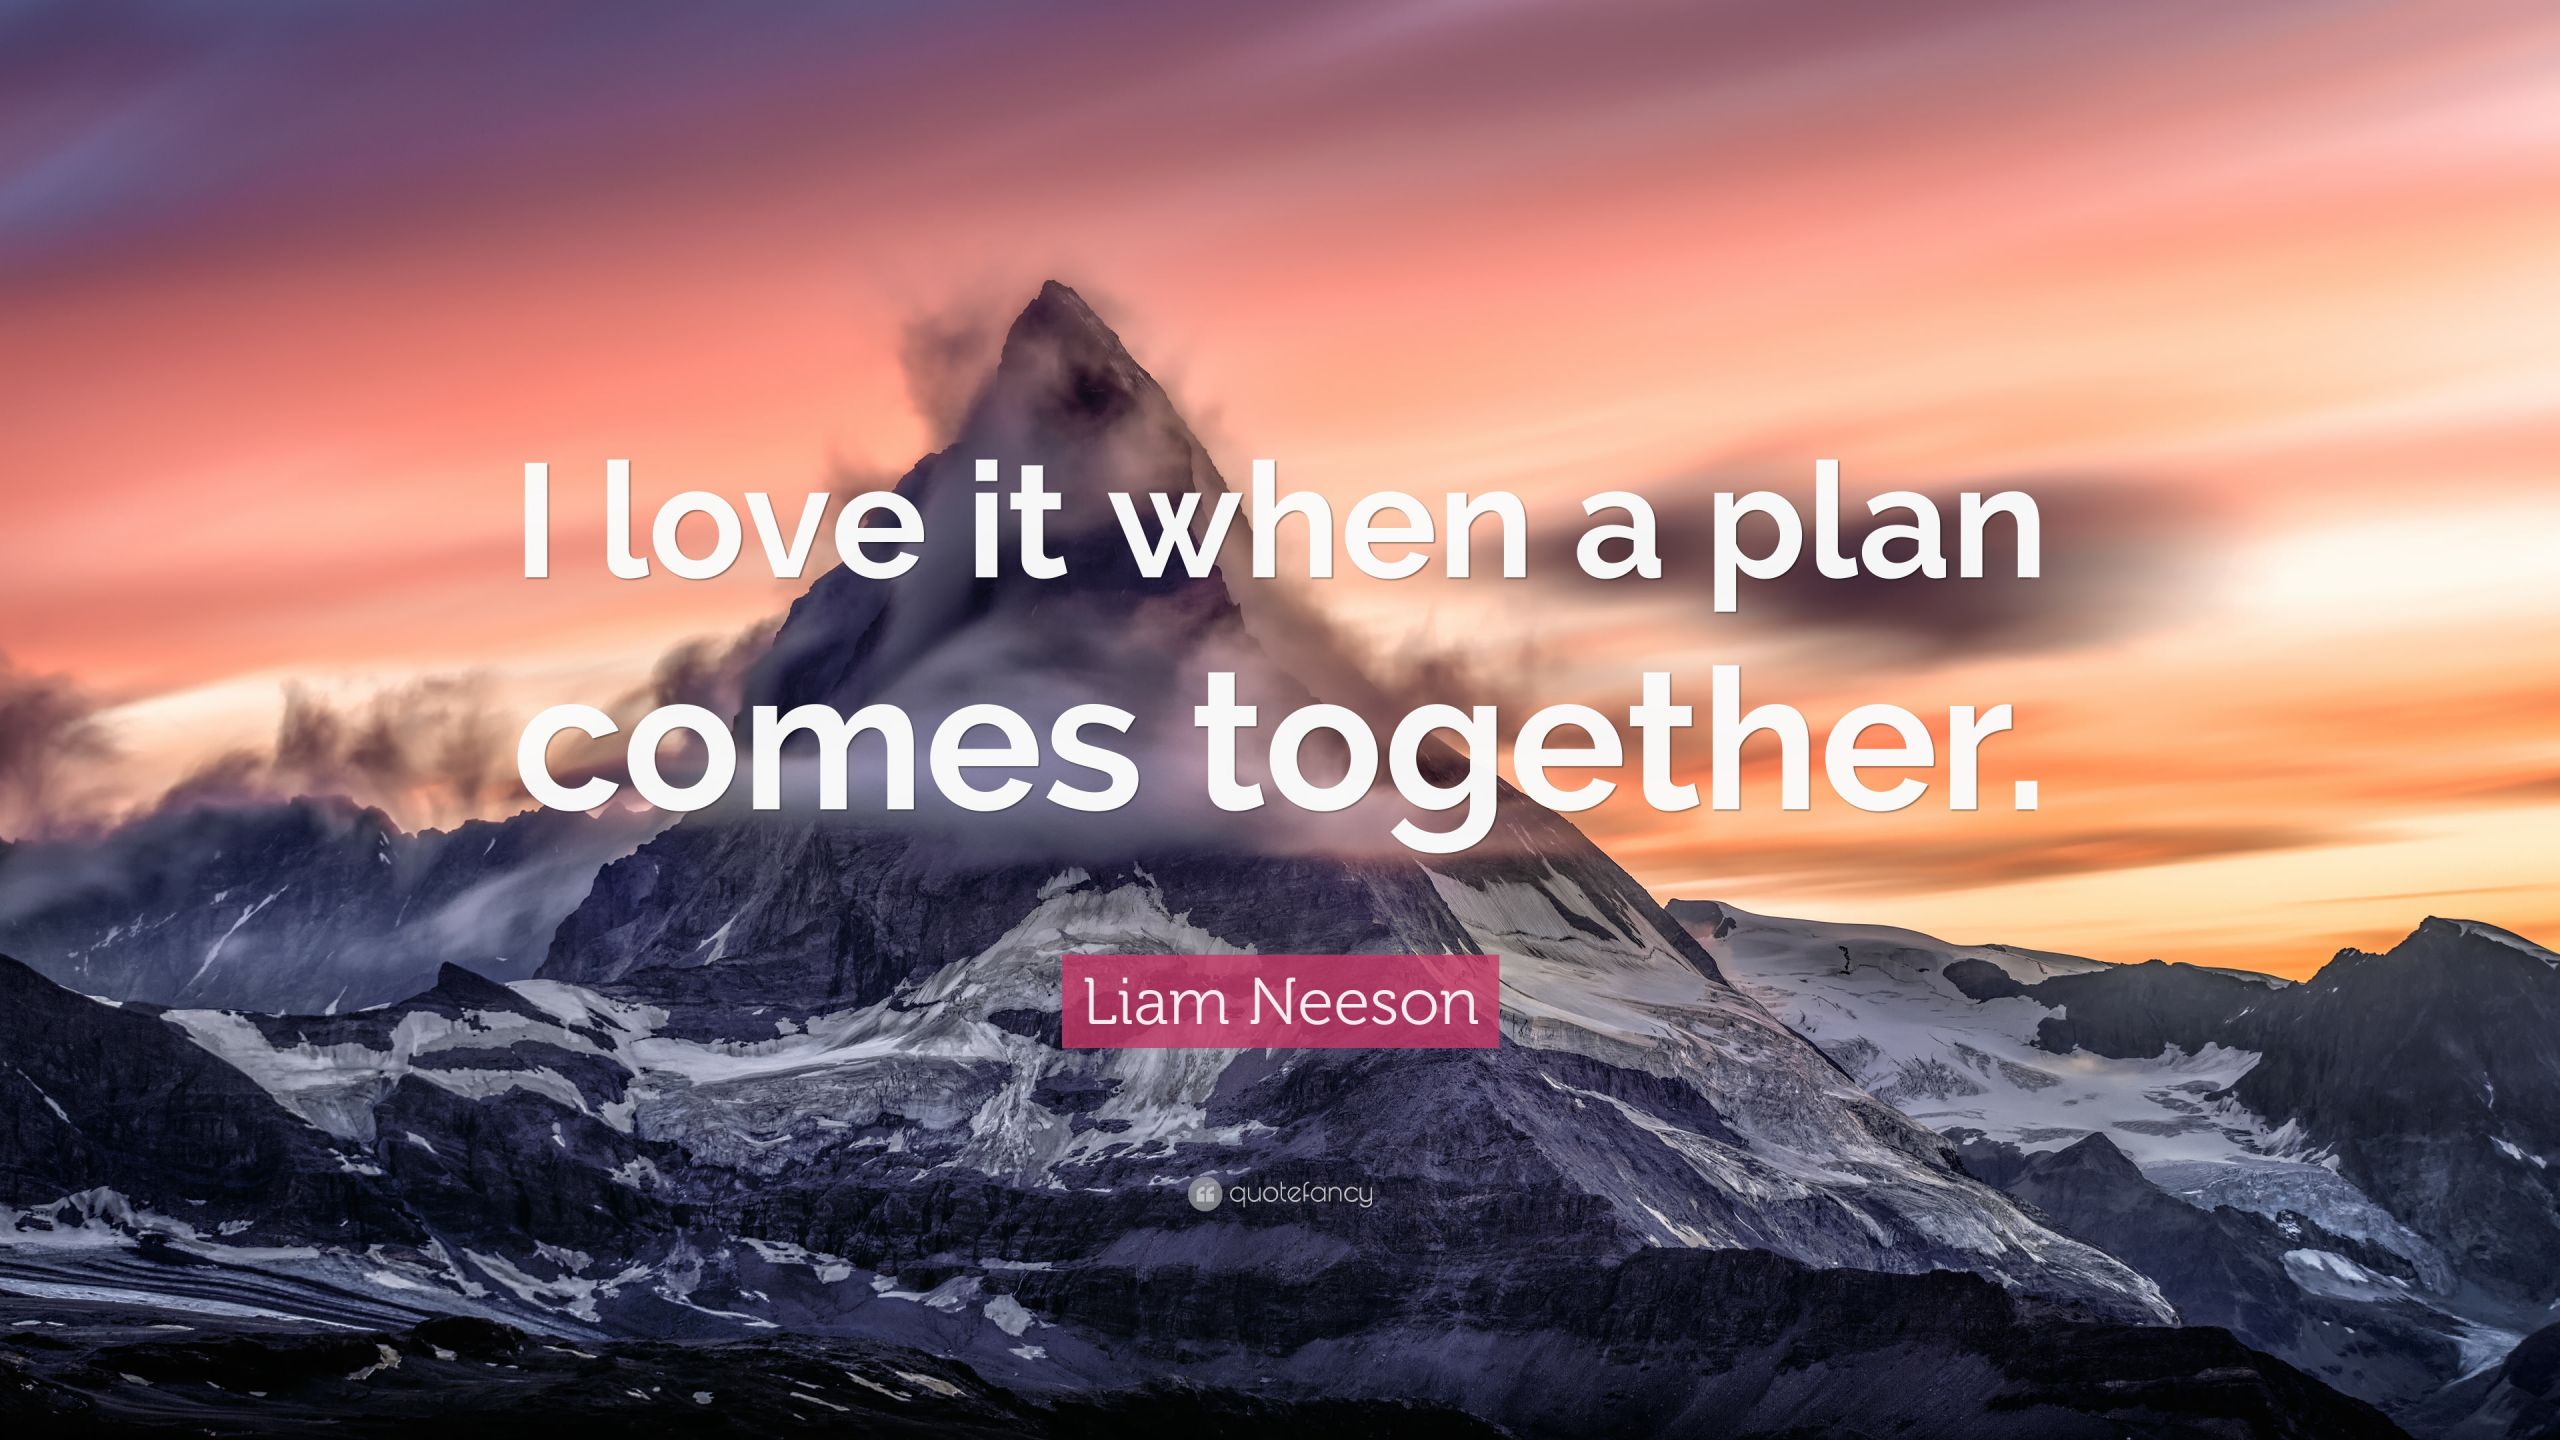 I Love It When A Plan Comes Together Quote
 Liam Neeson Quote “I love it when a plan es to her